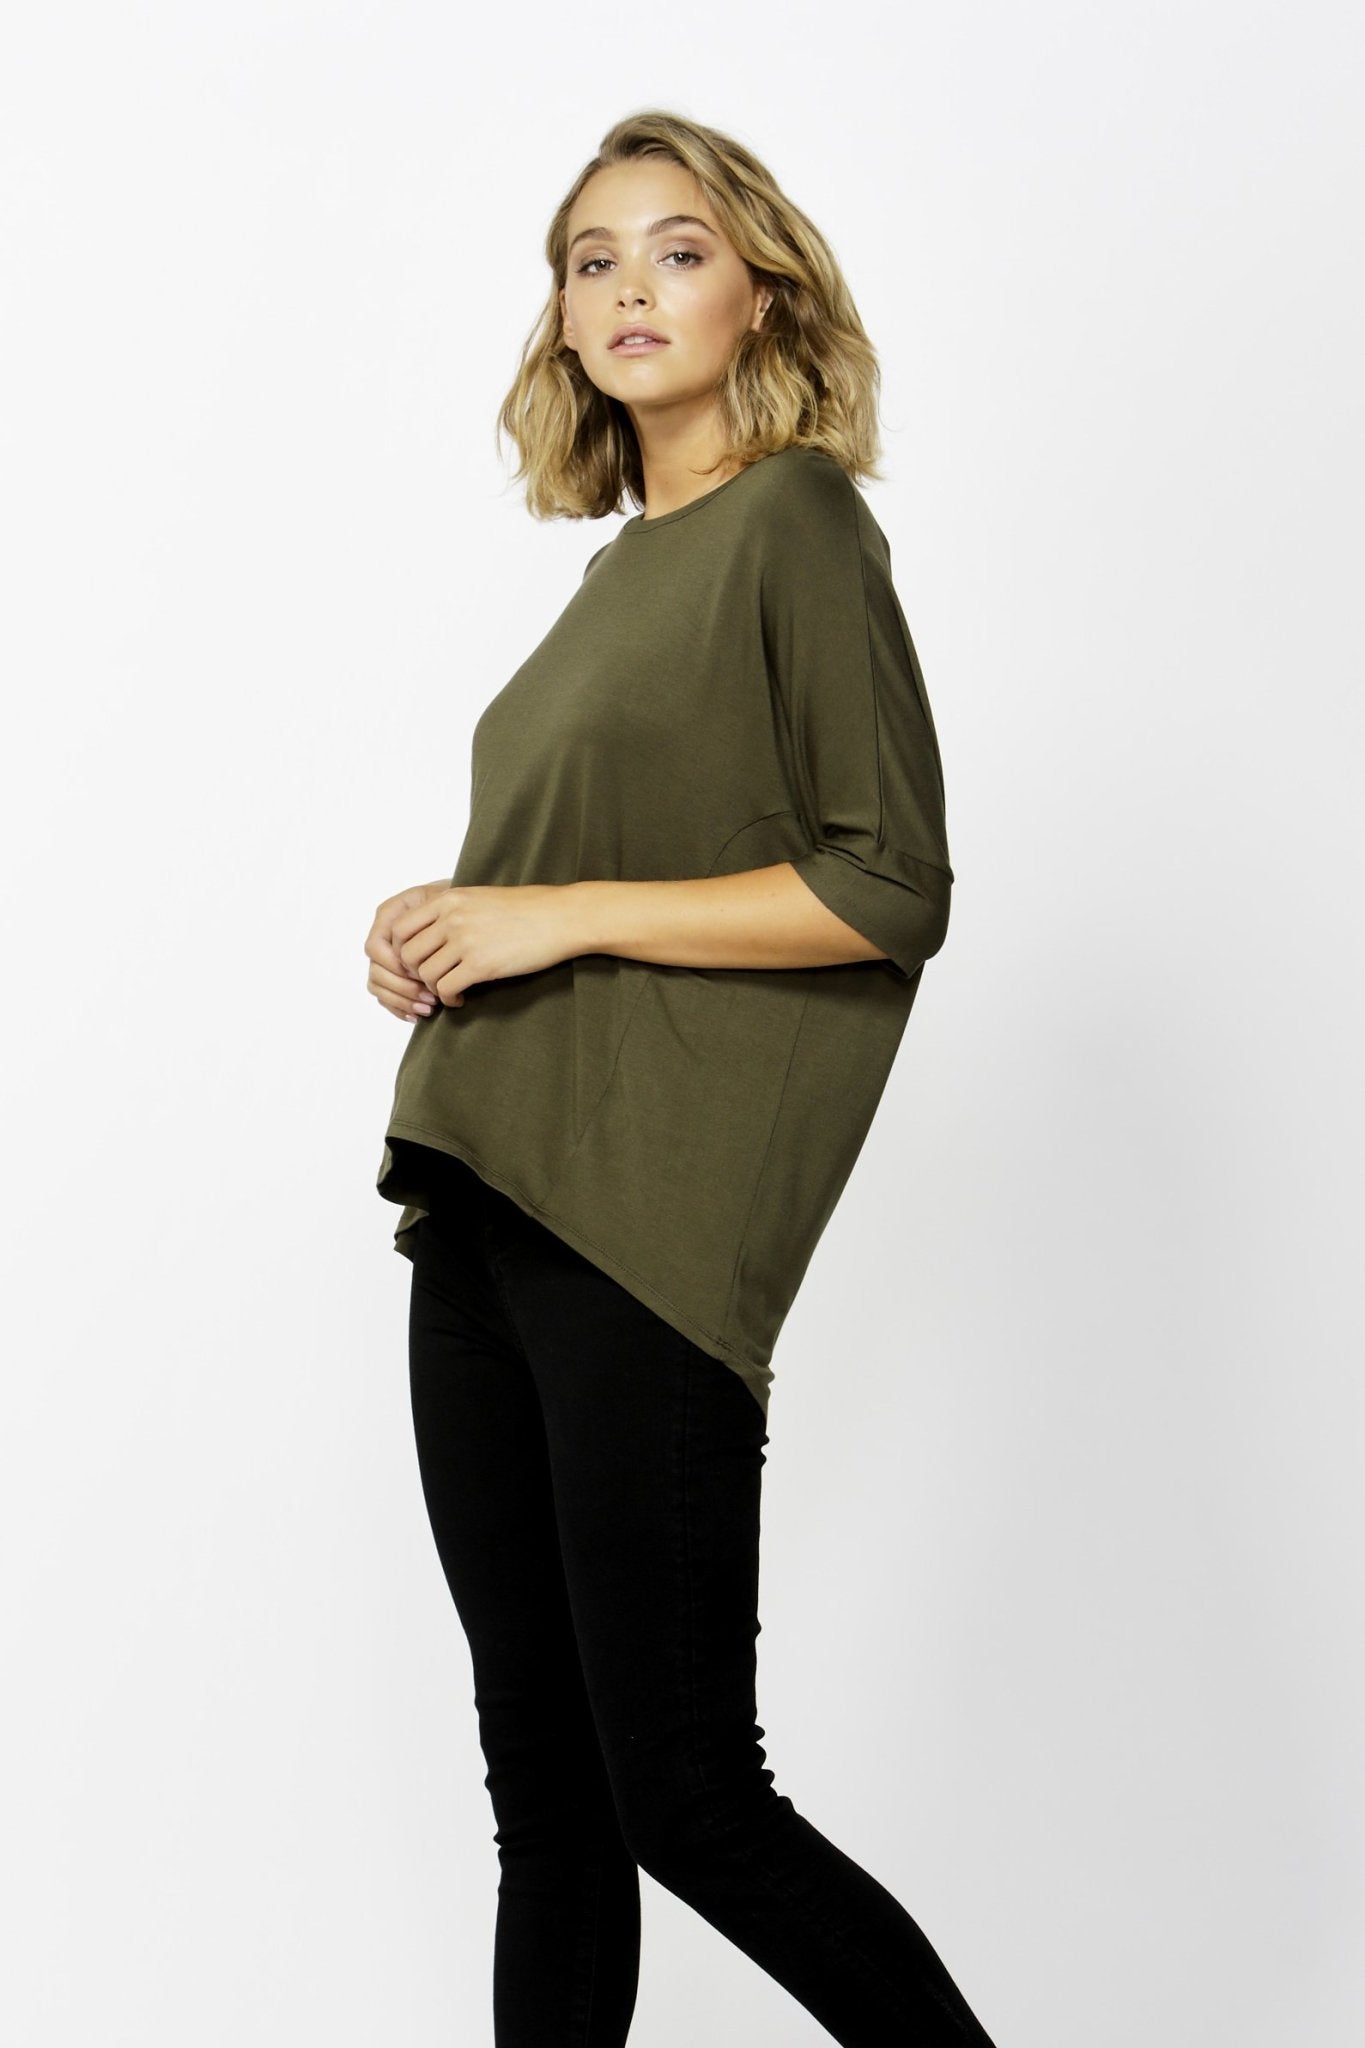 Betty Basics Wellington Tee in Olive Size 8 ONLY - Hey Sara